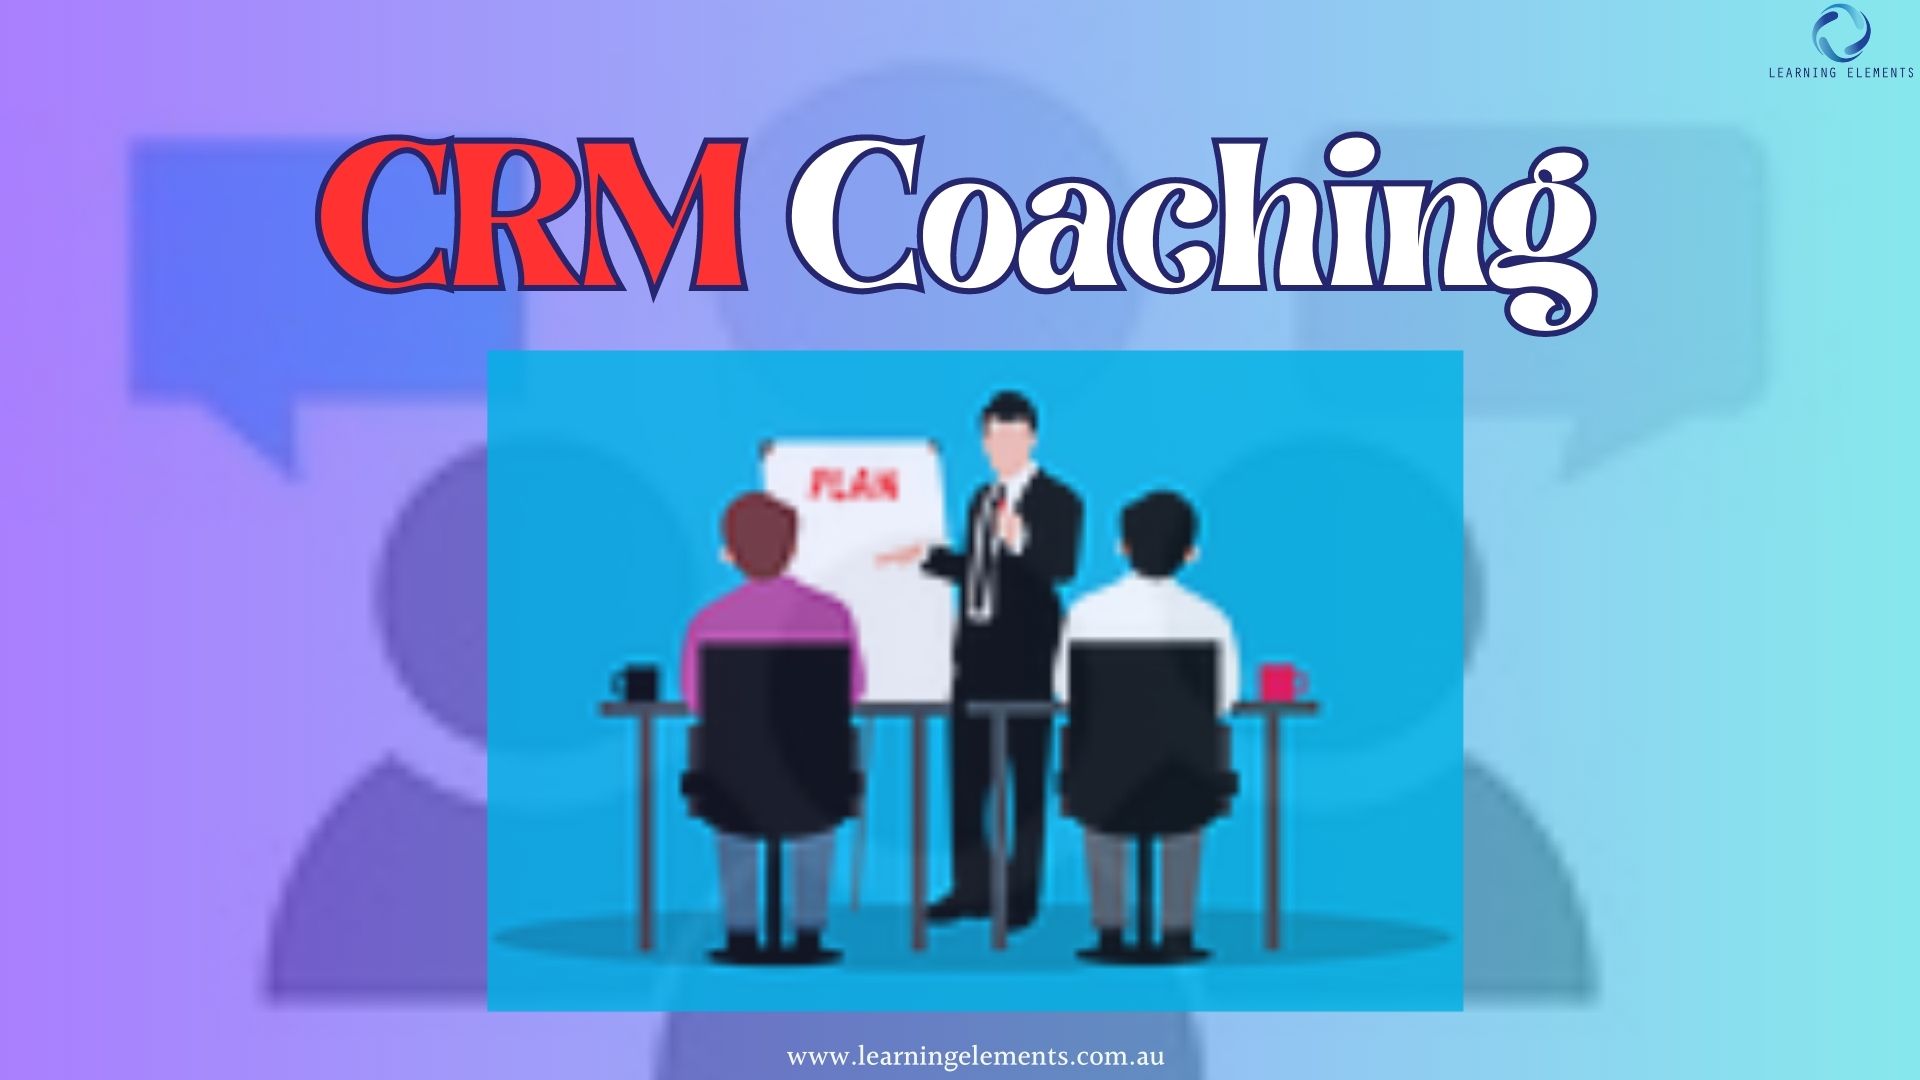 Learning Elements Team Will Coach You from CRM Basics to Advanced Features and Their Benefits